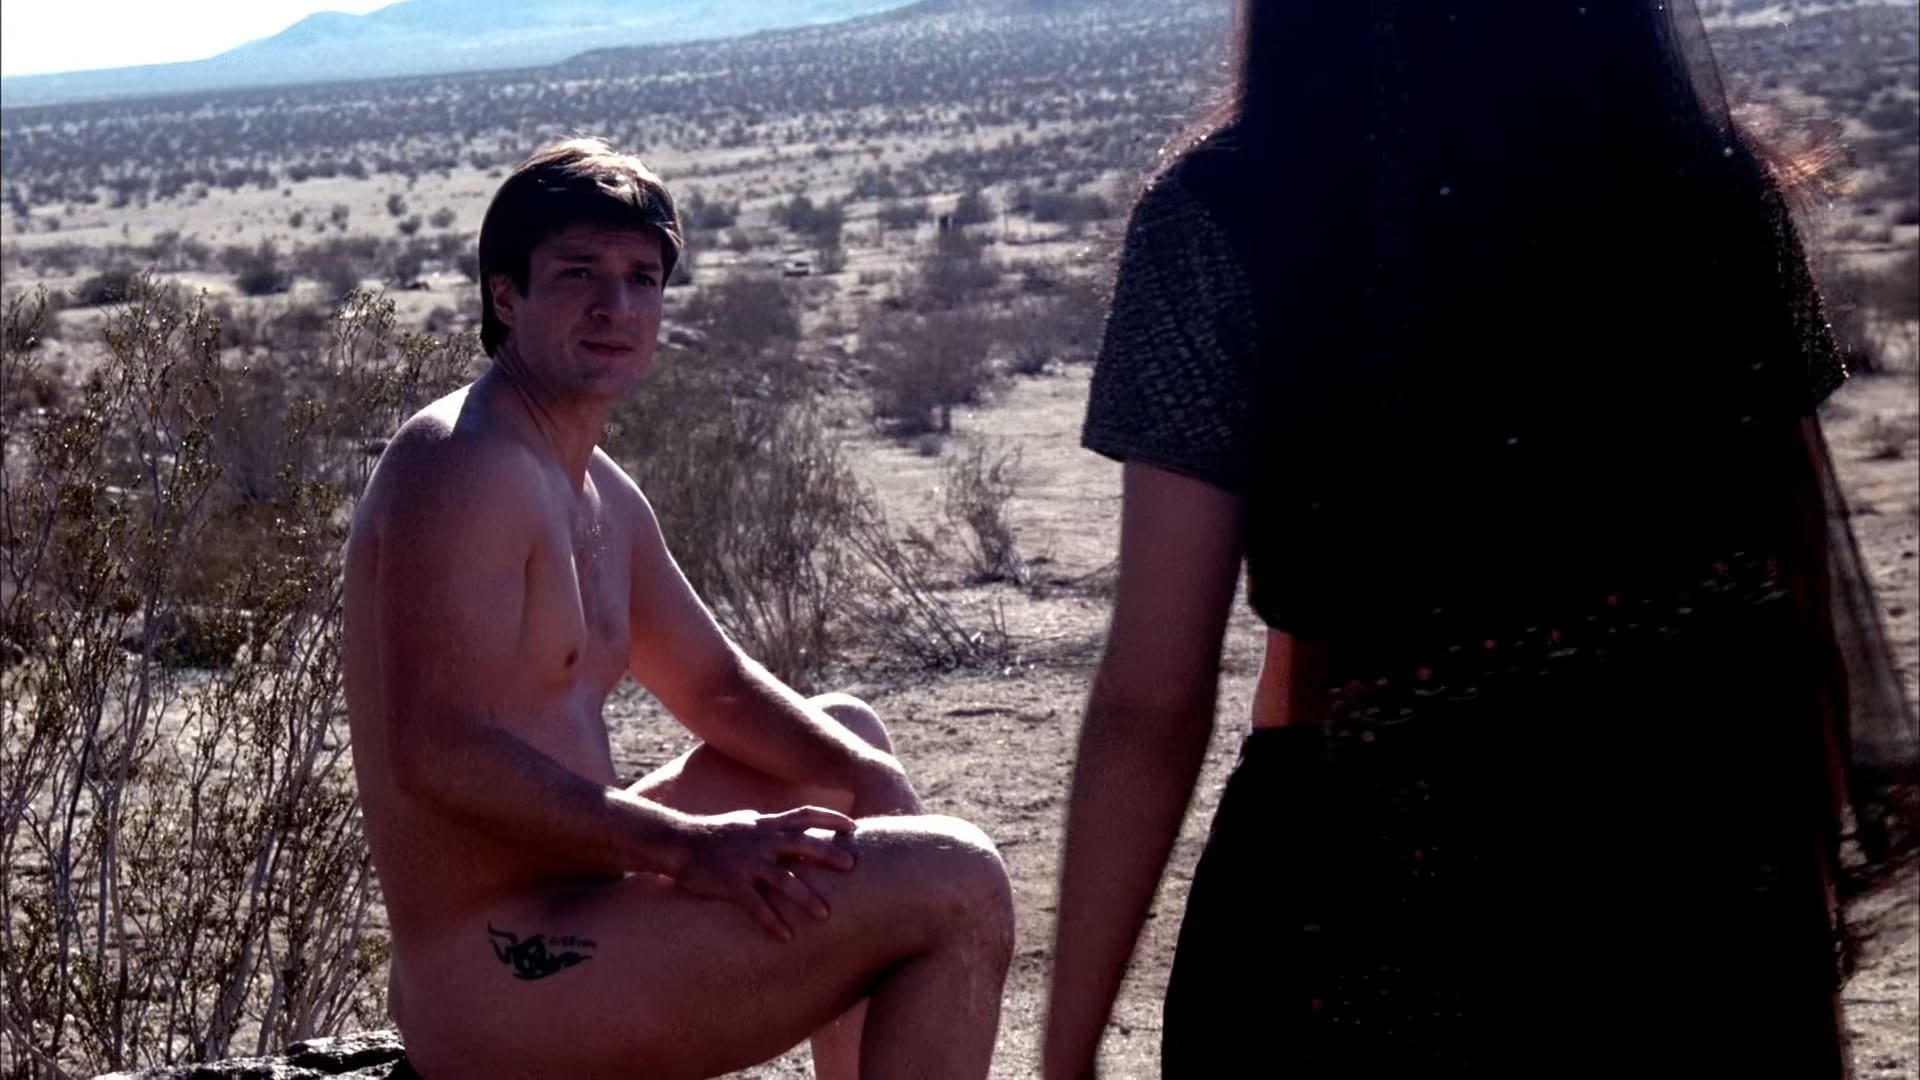 Nathan Fillion Nude Firefly.